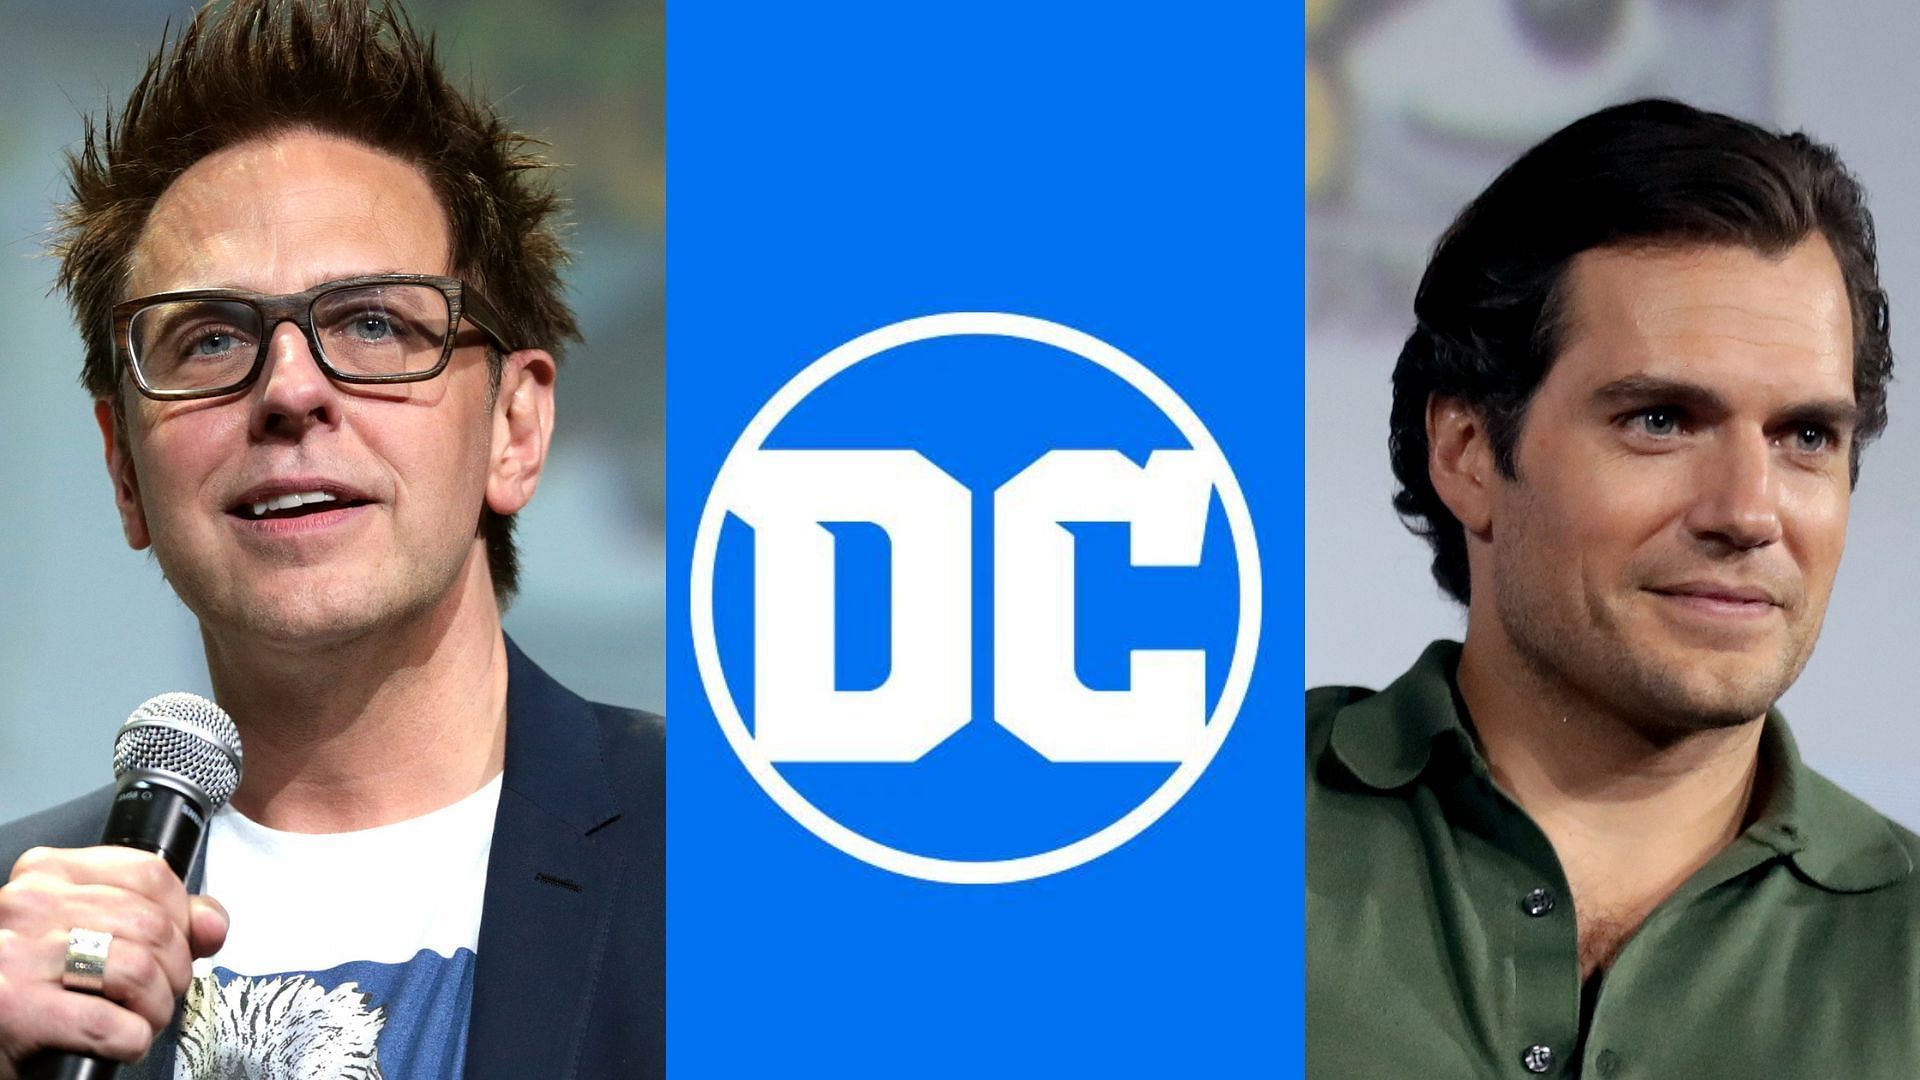 James Gunn Reacts To Rumours Of Firing Henry Cavill As Superman In DCU: He  Was Never Hired In The First Place